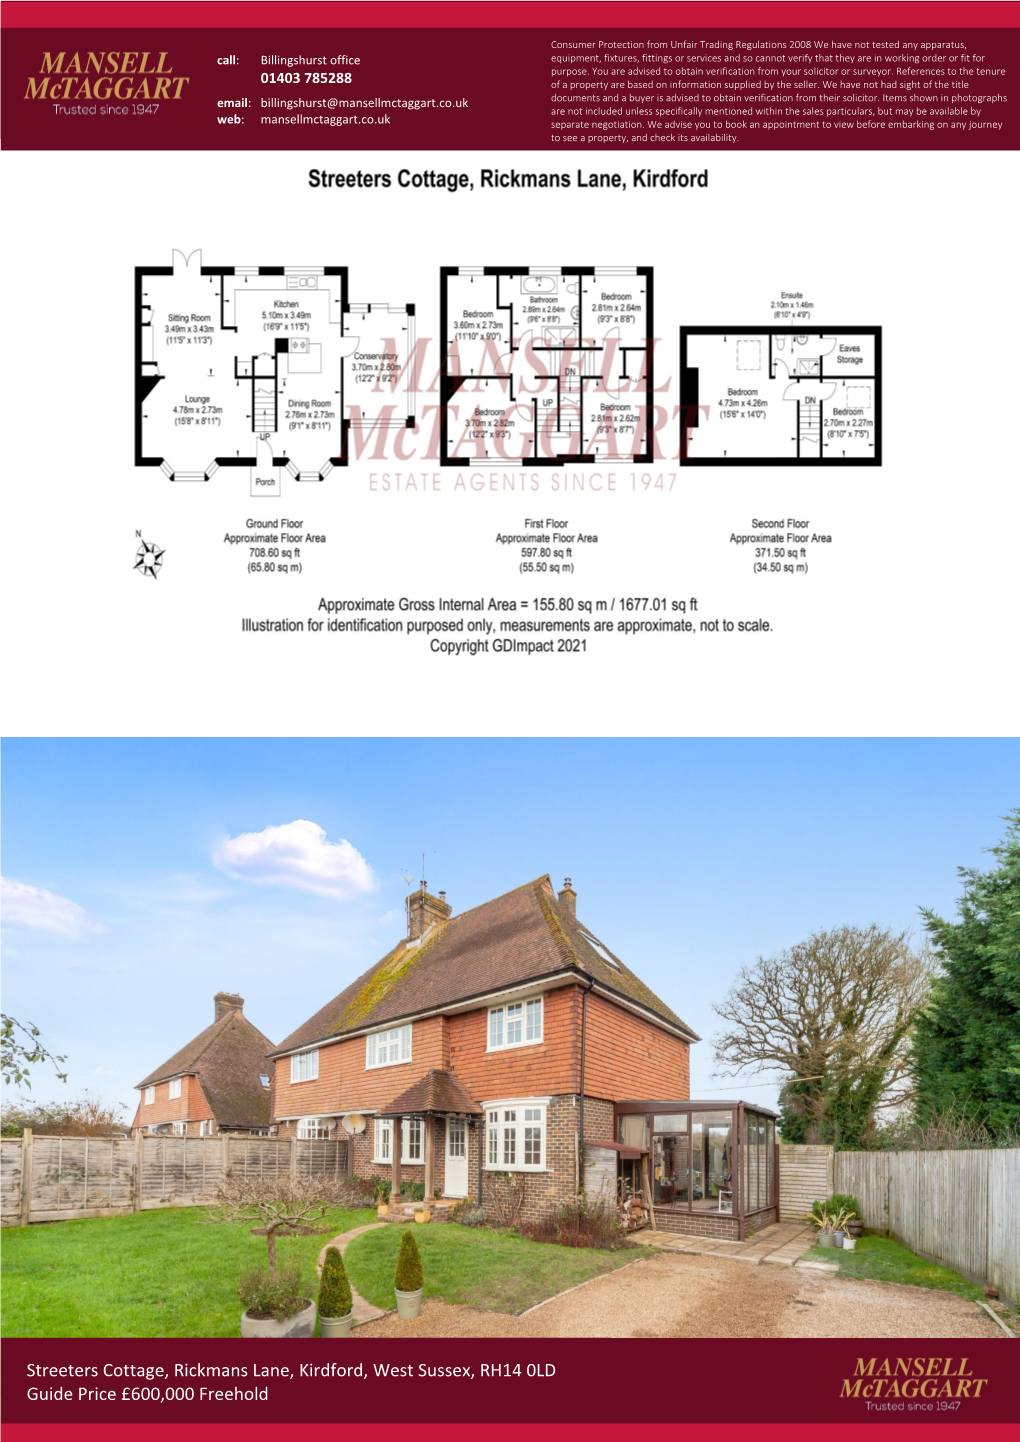 Streeters Cottage, Rickmans Lane, Kirdford, West Sussex, RH14 0LD Guide Price £600,000 Freehold